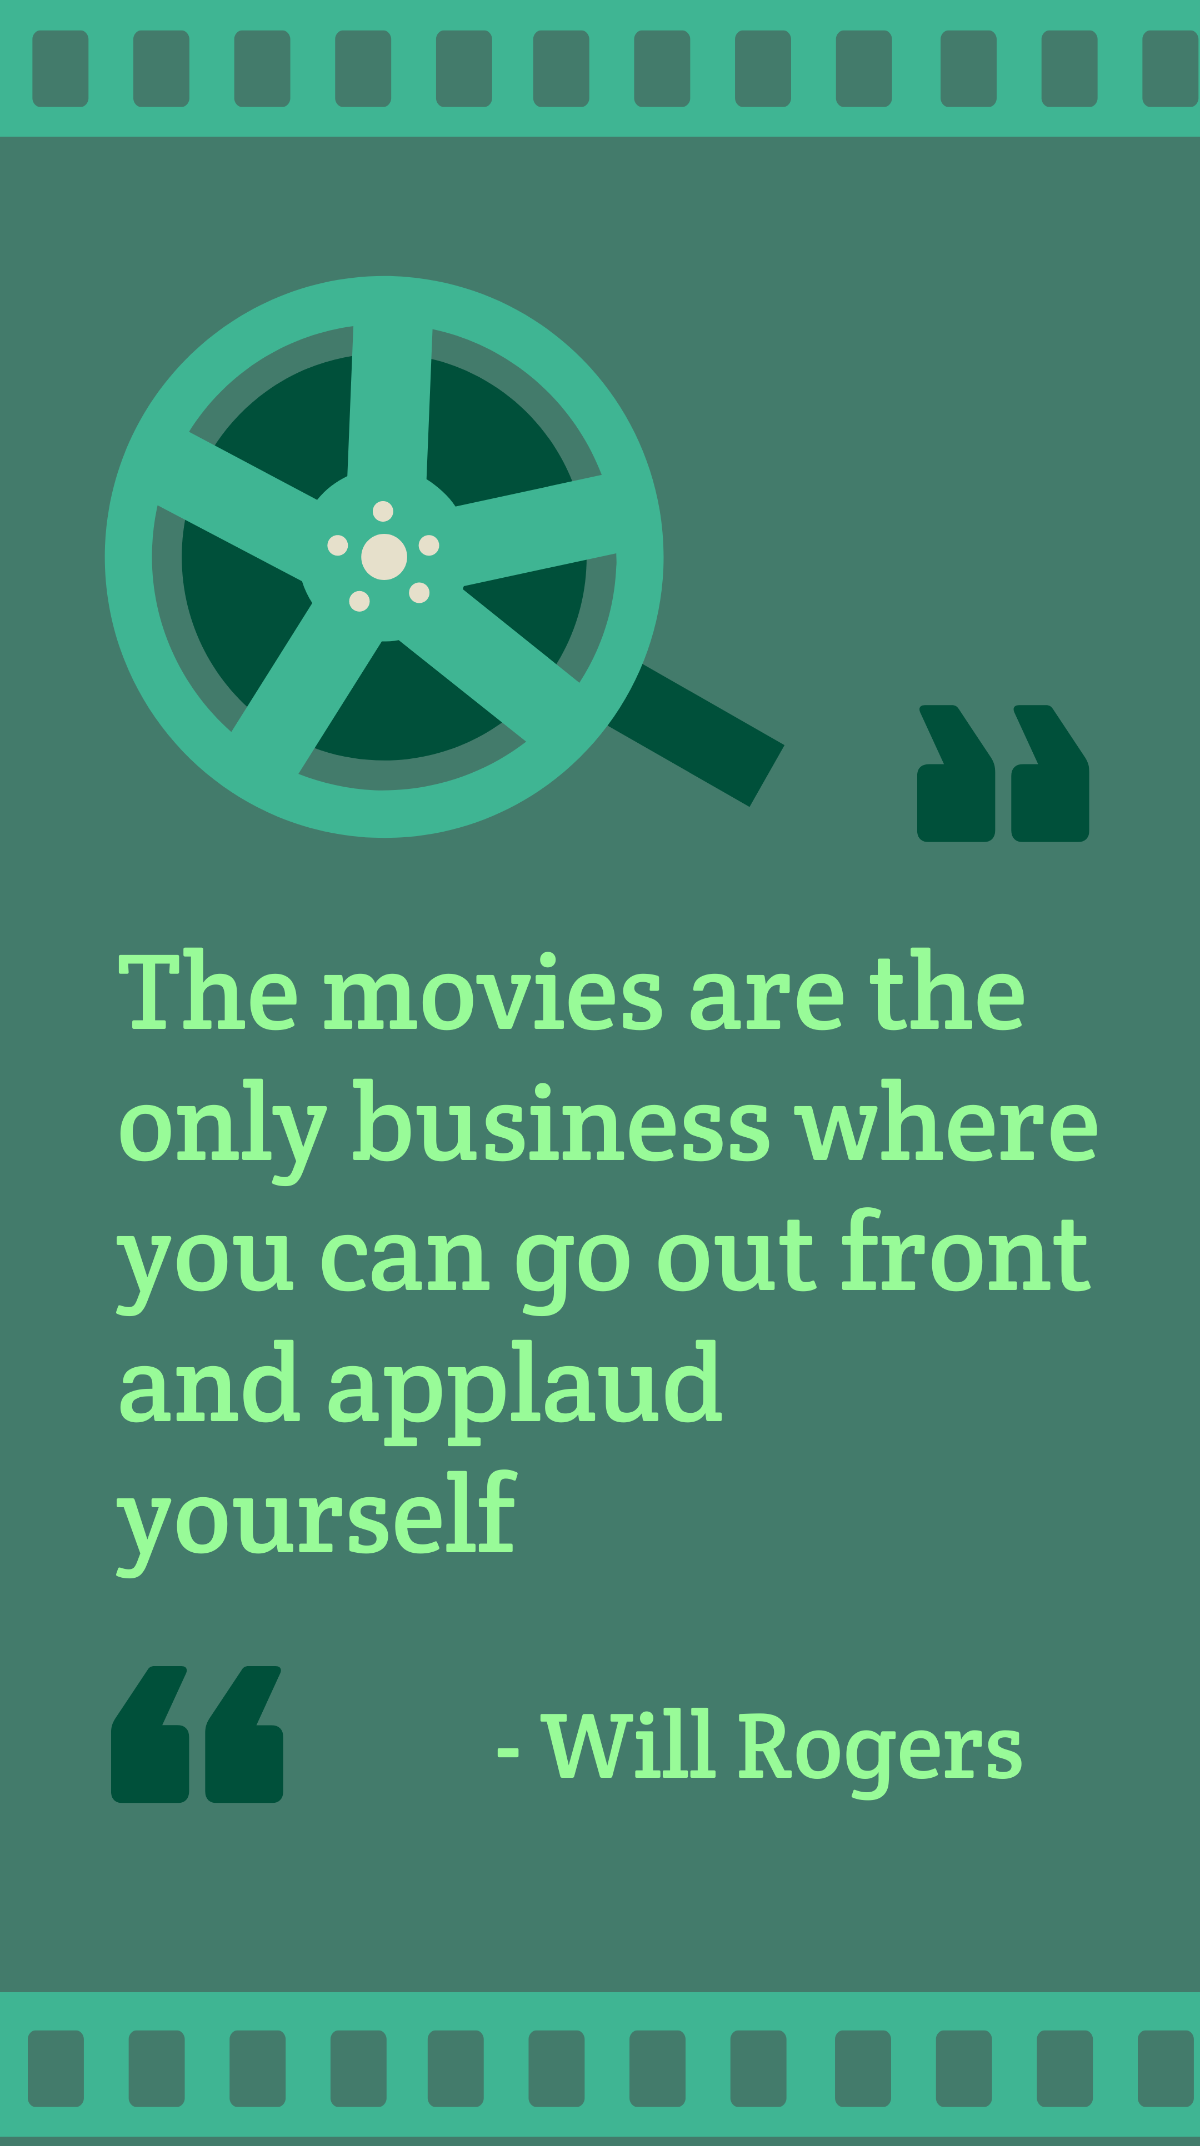 Will Rogers -The movies are the only business where you can go out front and applaud yourself Template